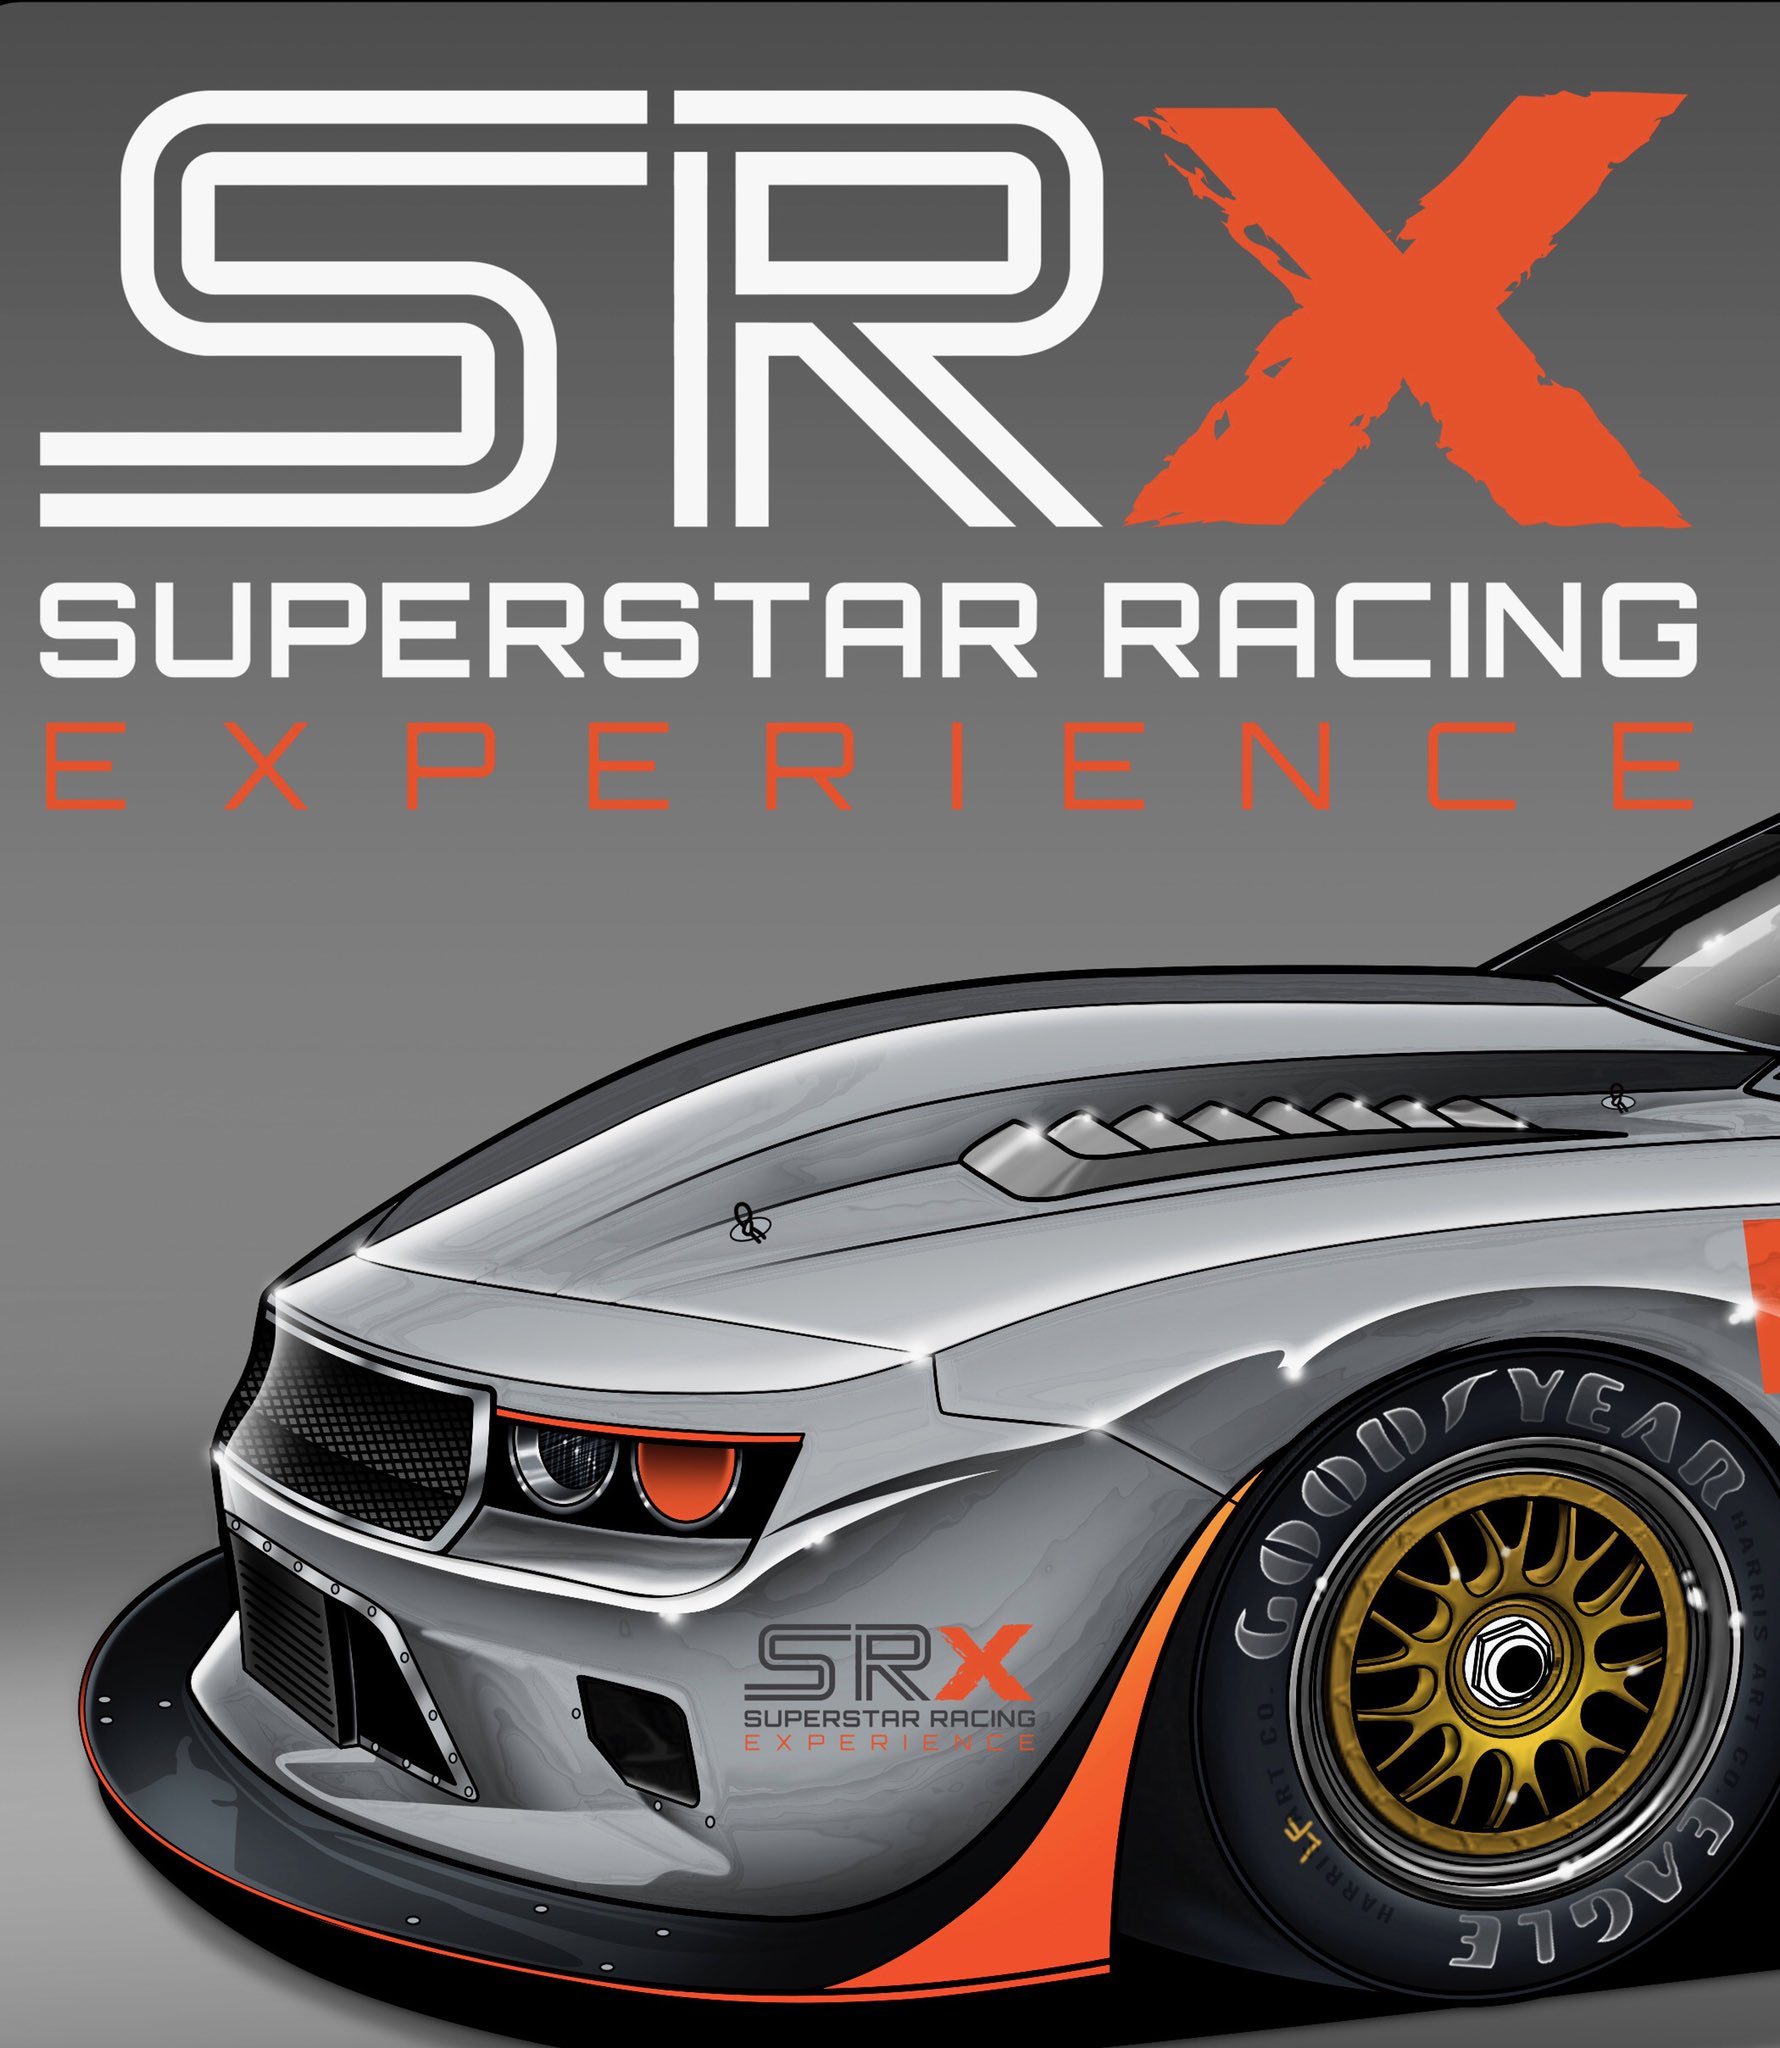 At Least SRX’s Race Cars Will Look Great